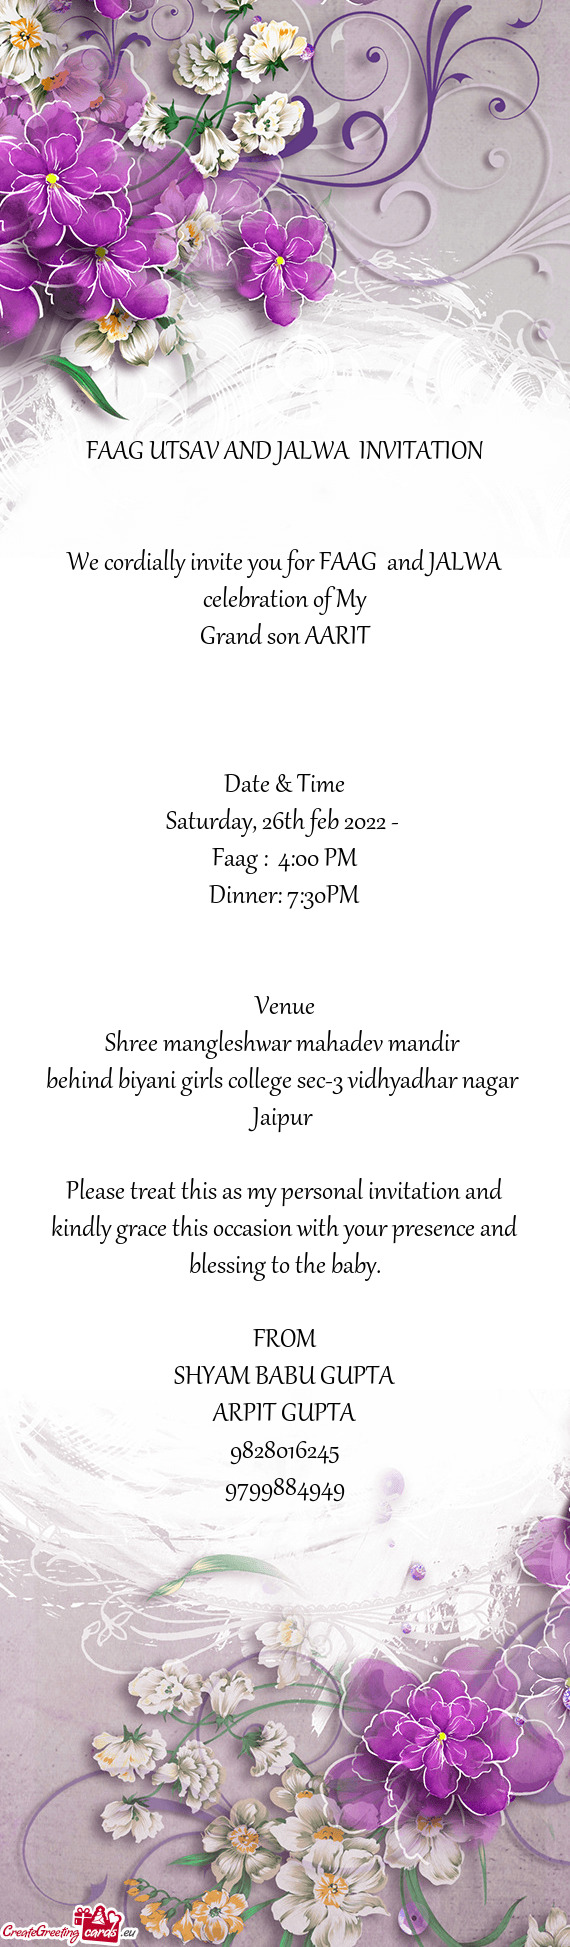 We cordially invite you for FAAG and JALWA celebration of My